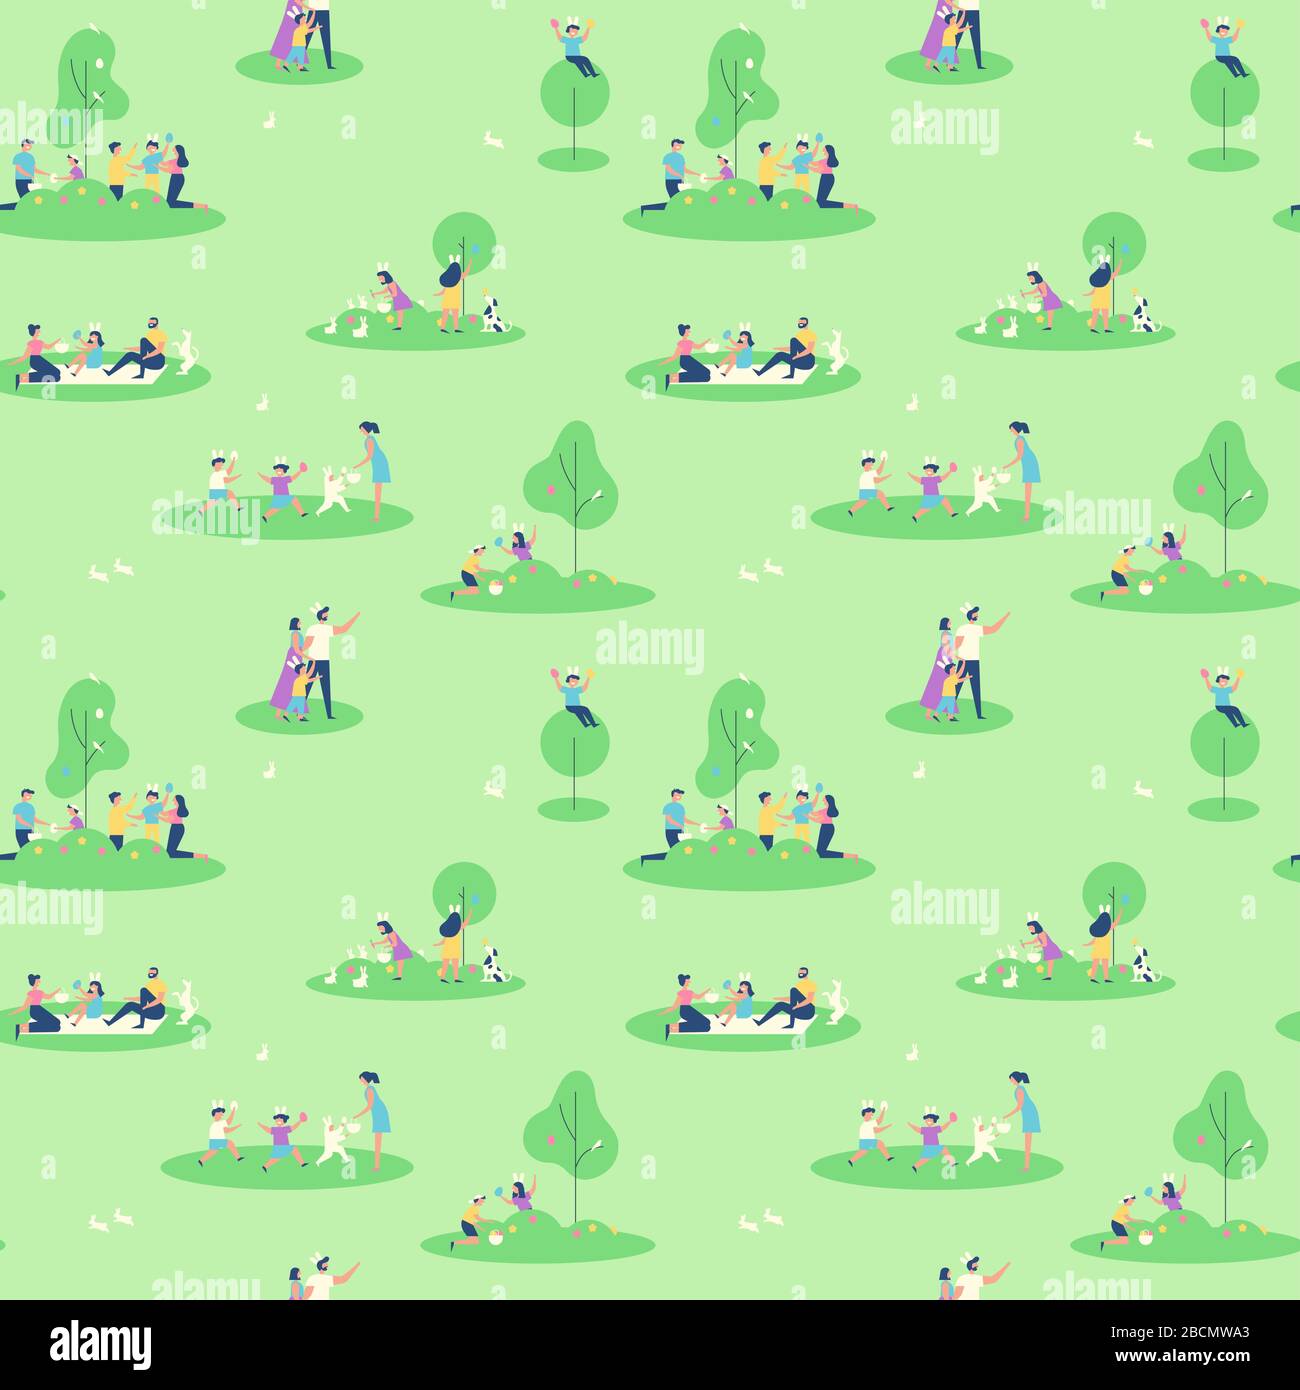 Easter holiday seamless pattern of happy family people enjoying spring season at outdoor park. Colorful springtime background with rabbit animals and Stock Vector